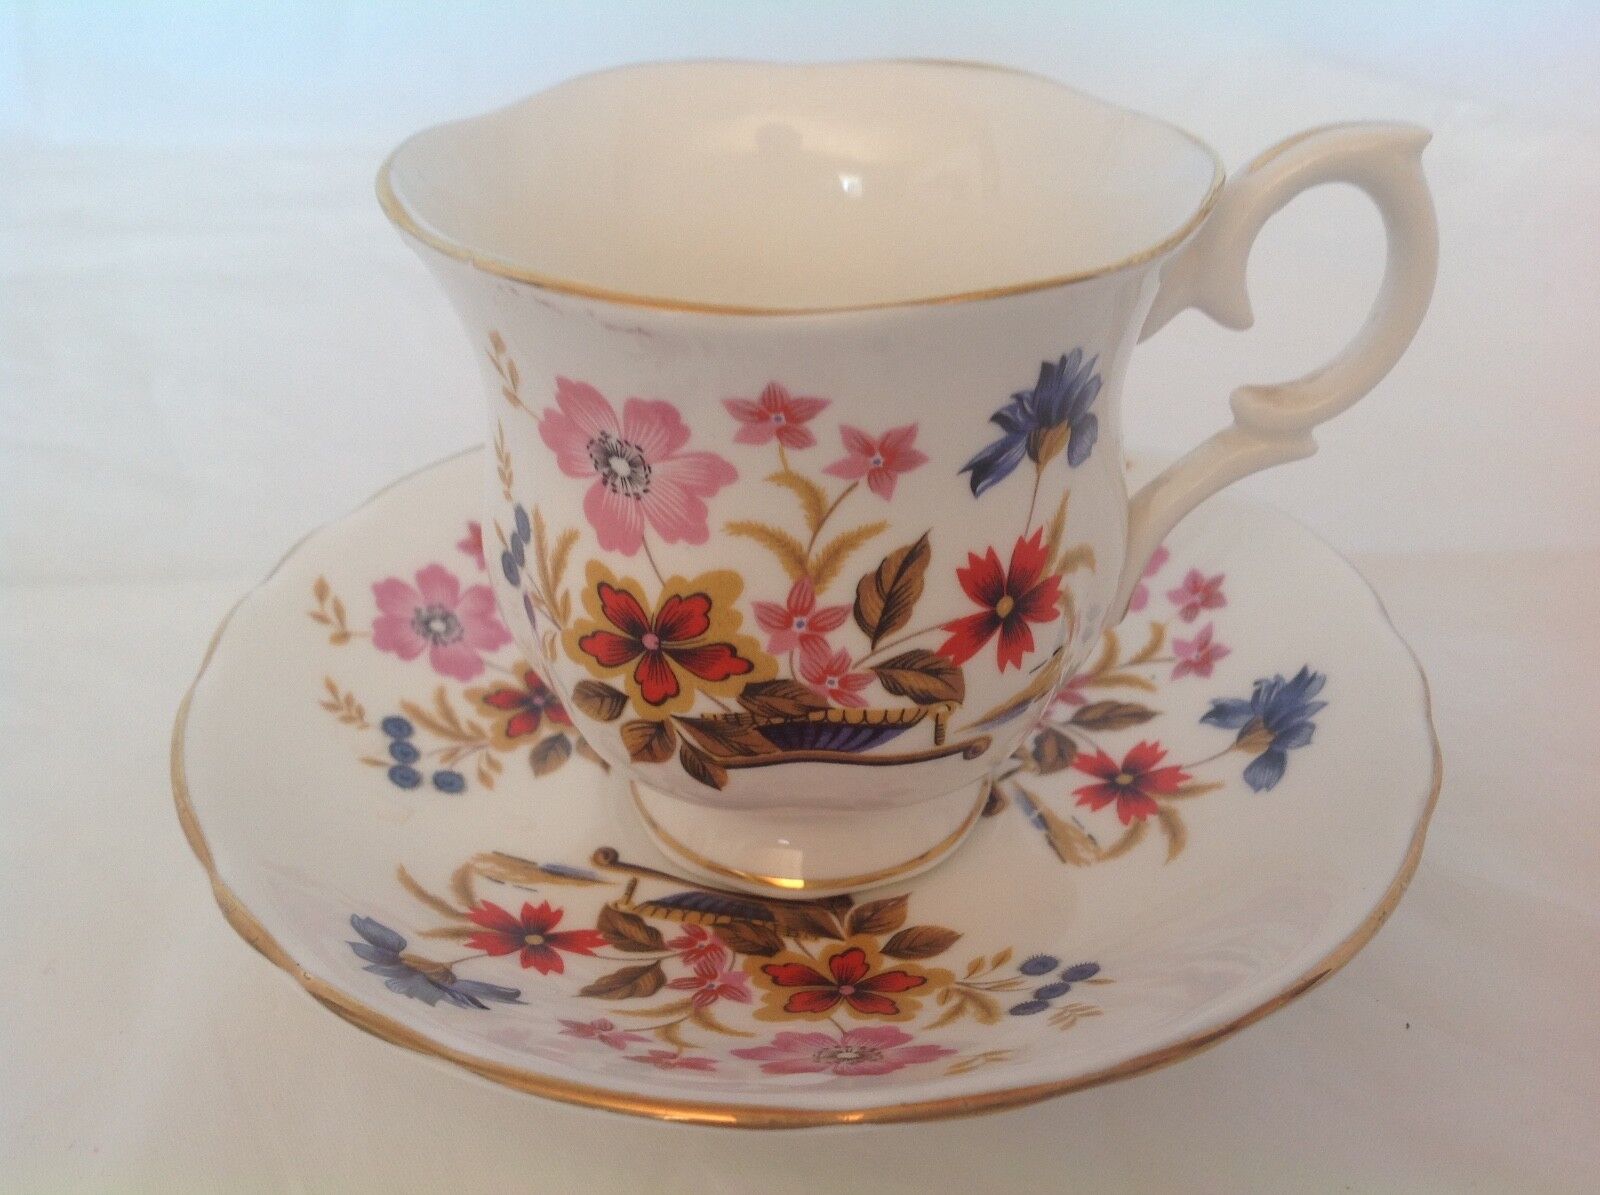 BONE CHINA CUP & SAUCER CROWN STAFFORDSHIRE B402 FLORAL PINK RED BLUE GOLD TRIM